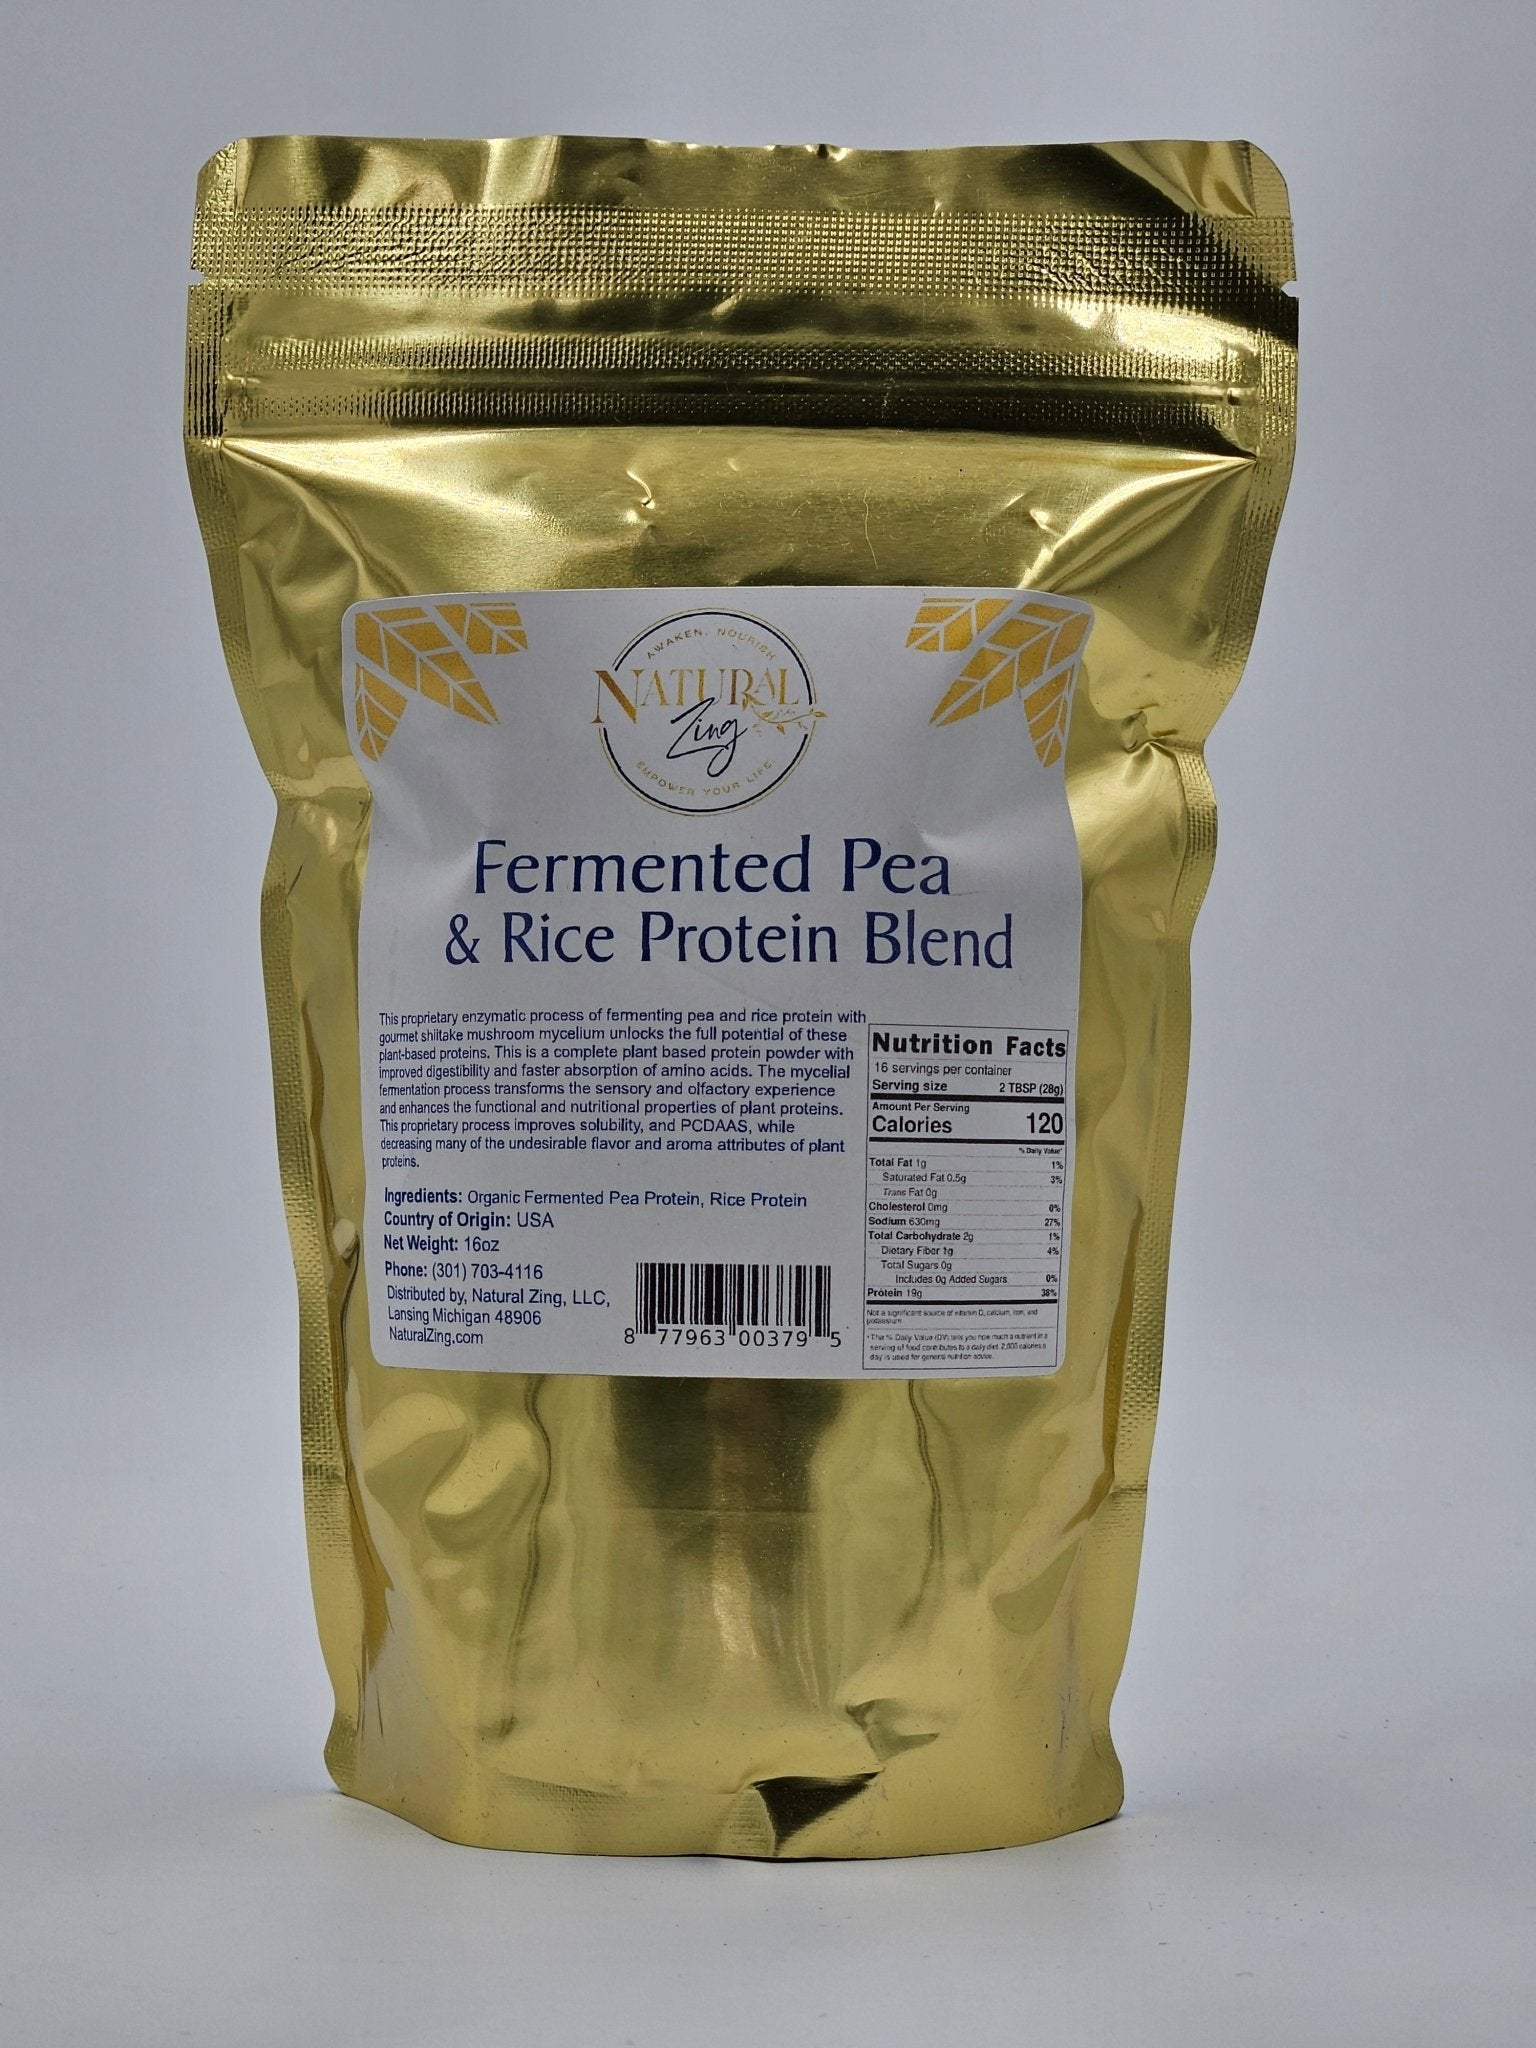 Fermented Brown Rice/Pea Protein Blend 16 oz - Natural Zing